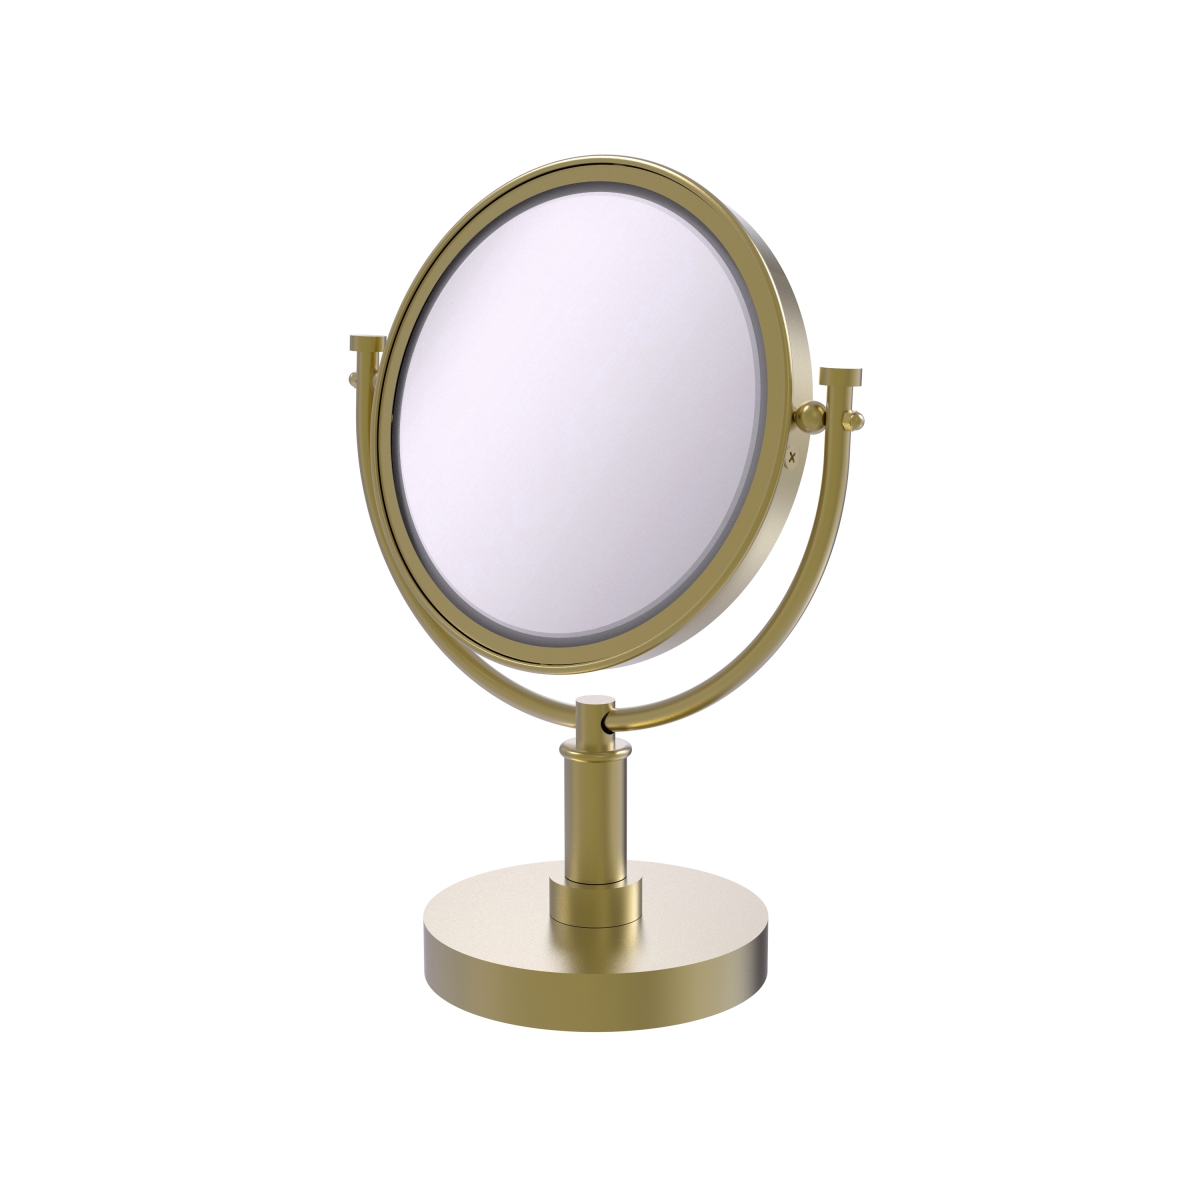 Dm-4-3x-sbr Smooth Ring Style 8 In. Vanity Top Make-up Mirror 3x Magnification, Satin Brass